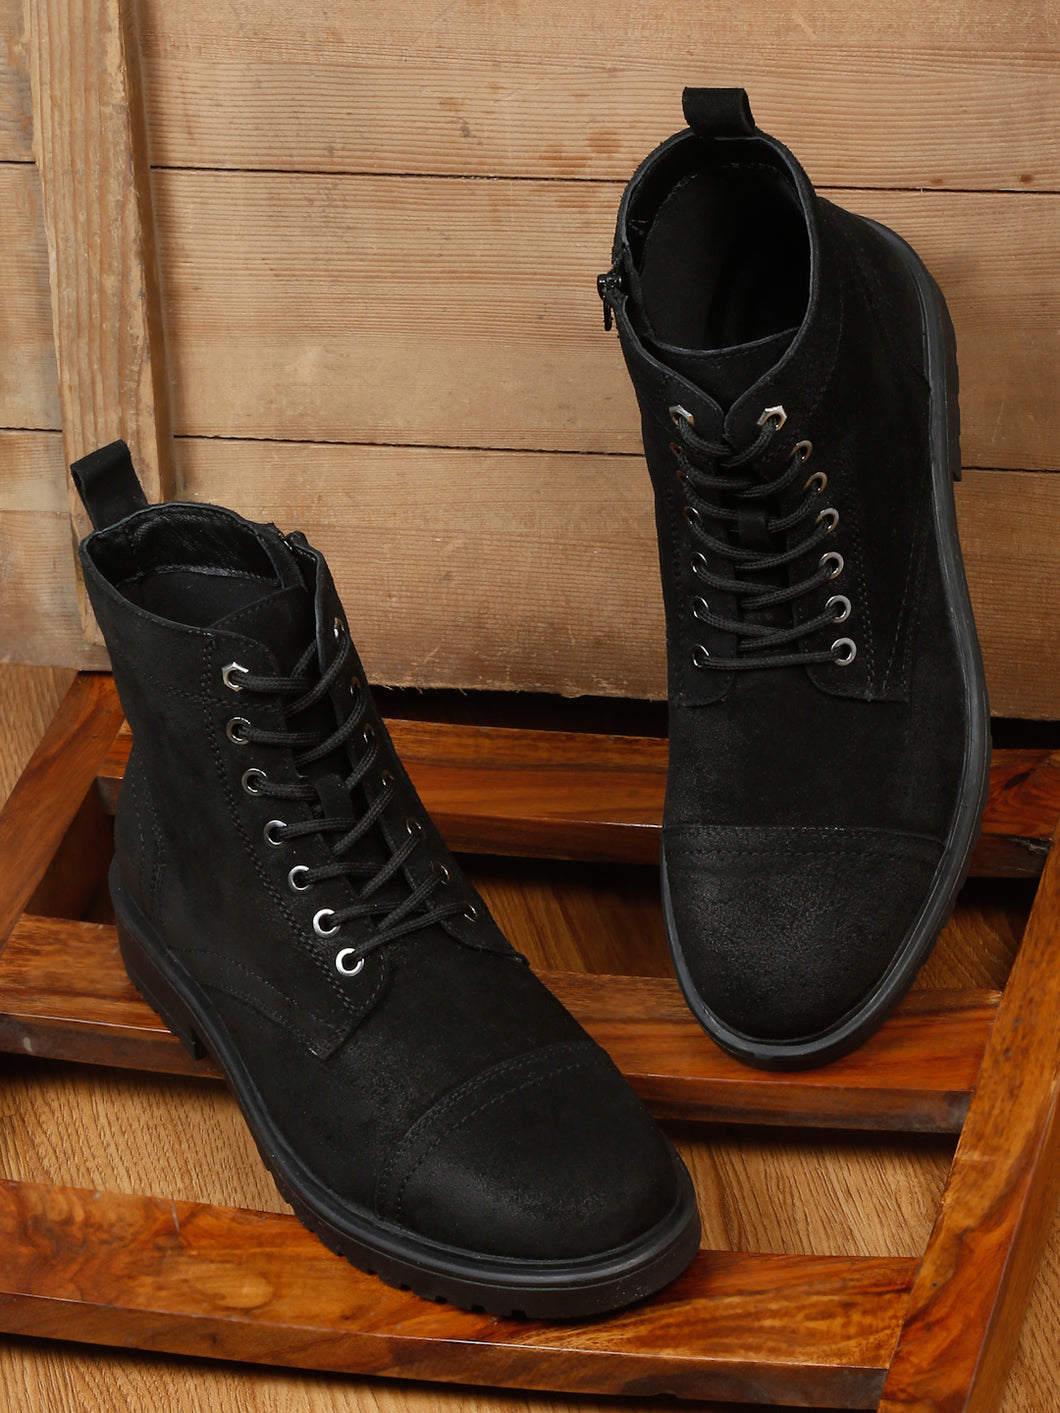 Mens Black Leather Lace-up Boots